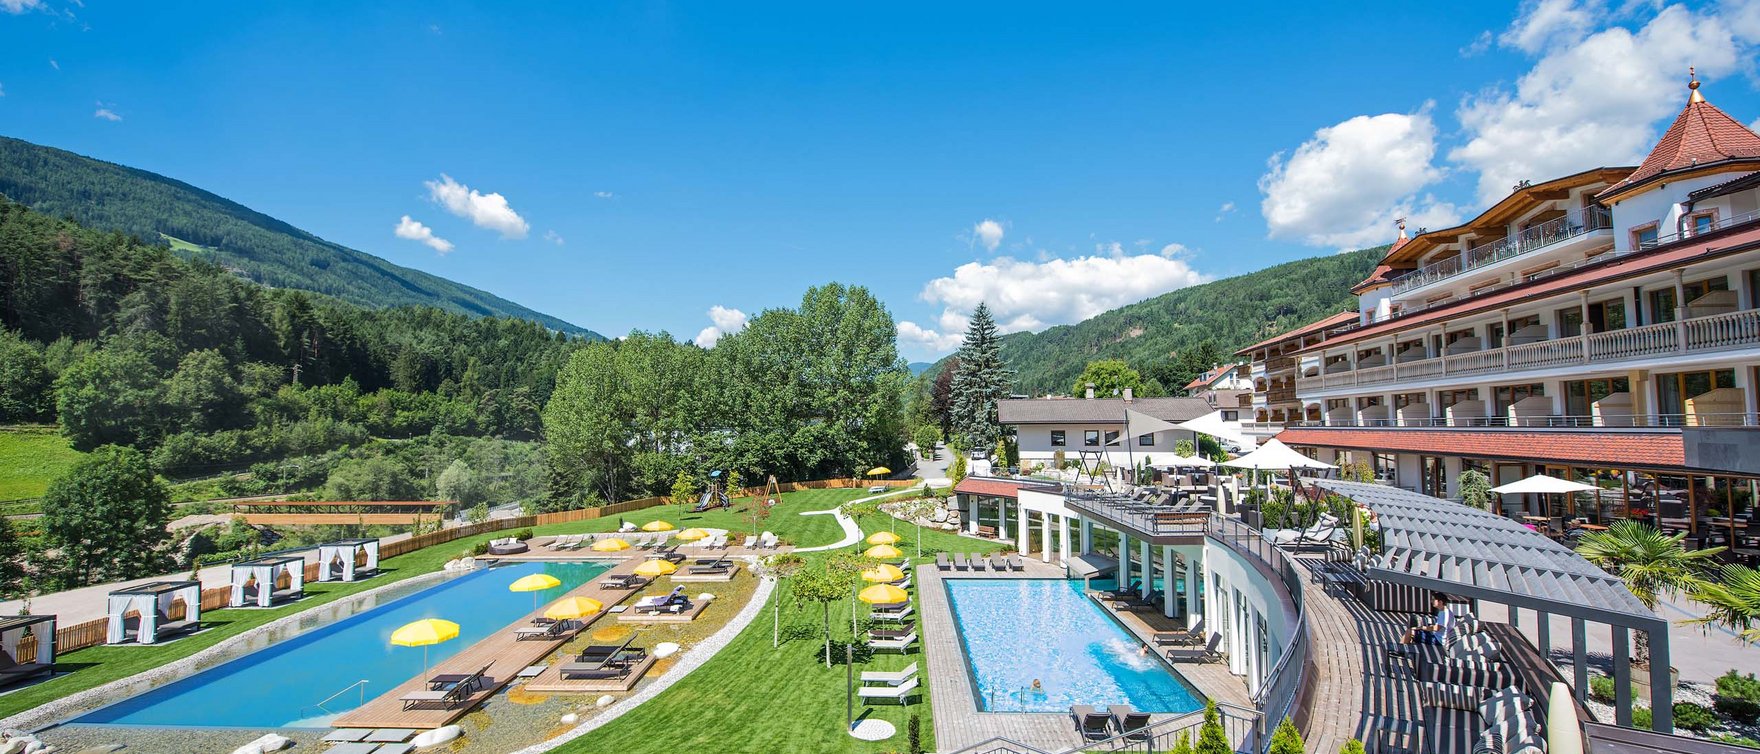 Family hotel in South Tyrol: With us, our guests are king.